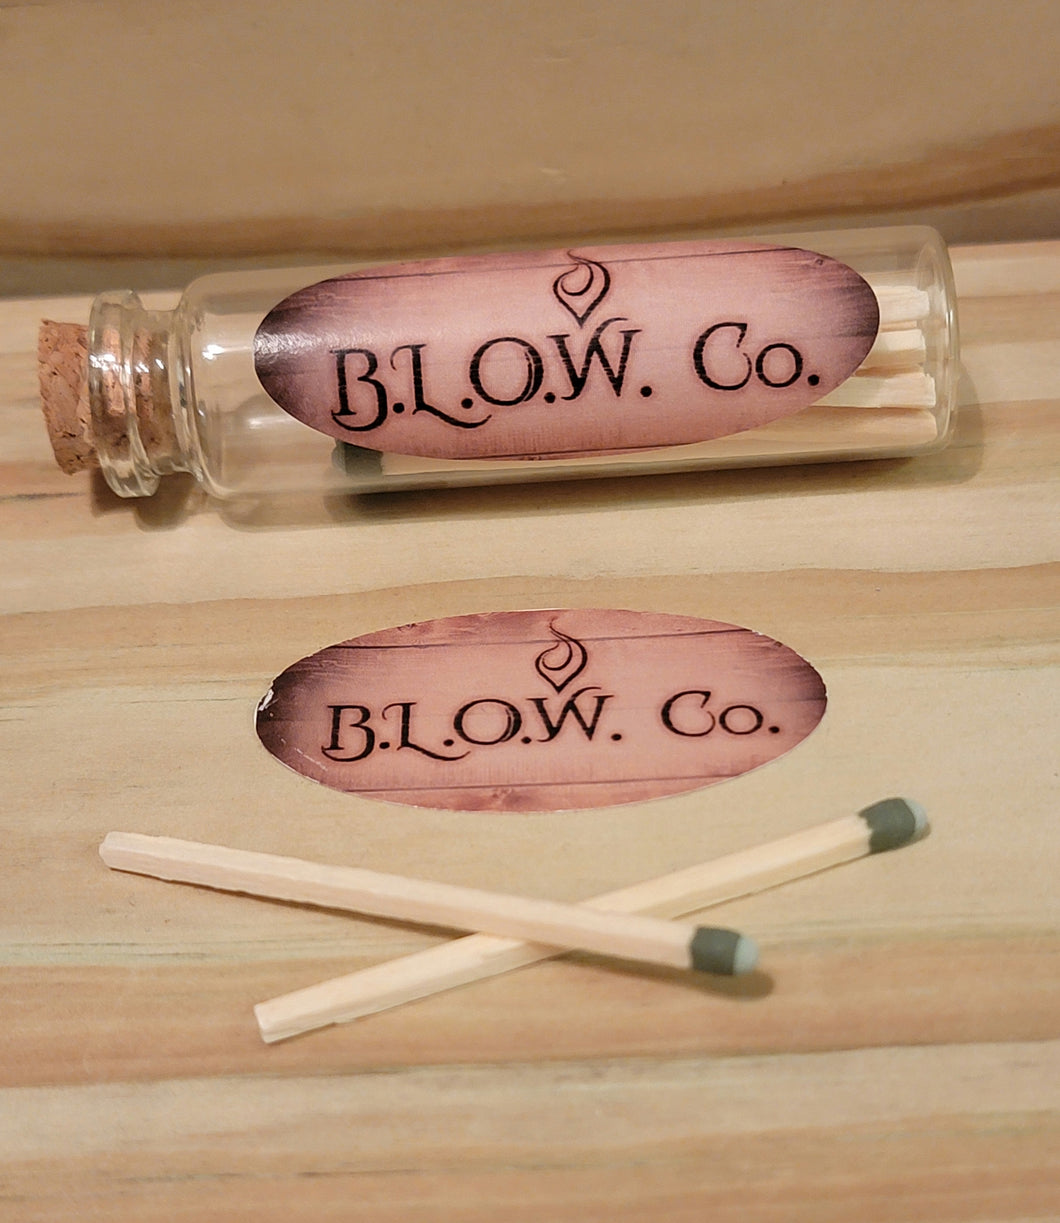 B.L.O.W. Co matches for candle lighting